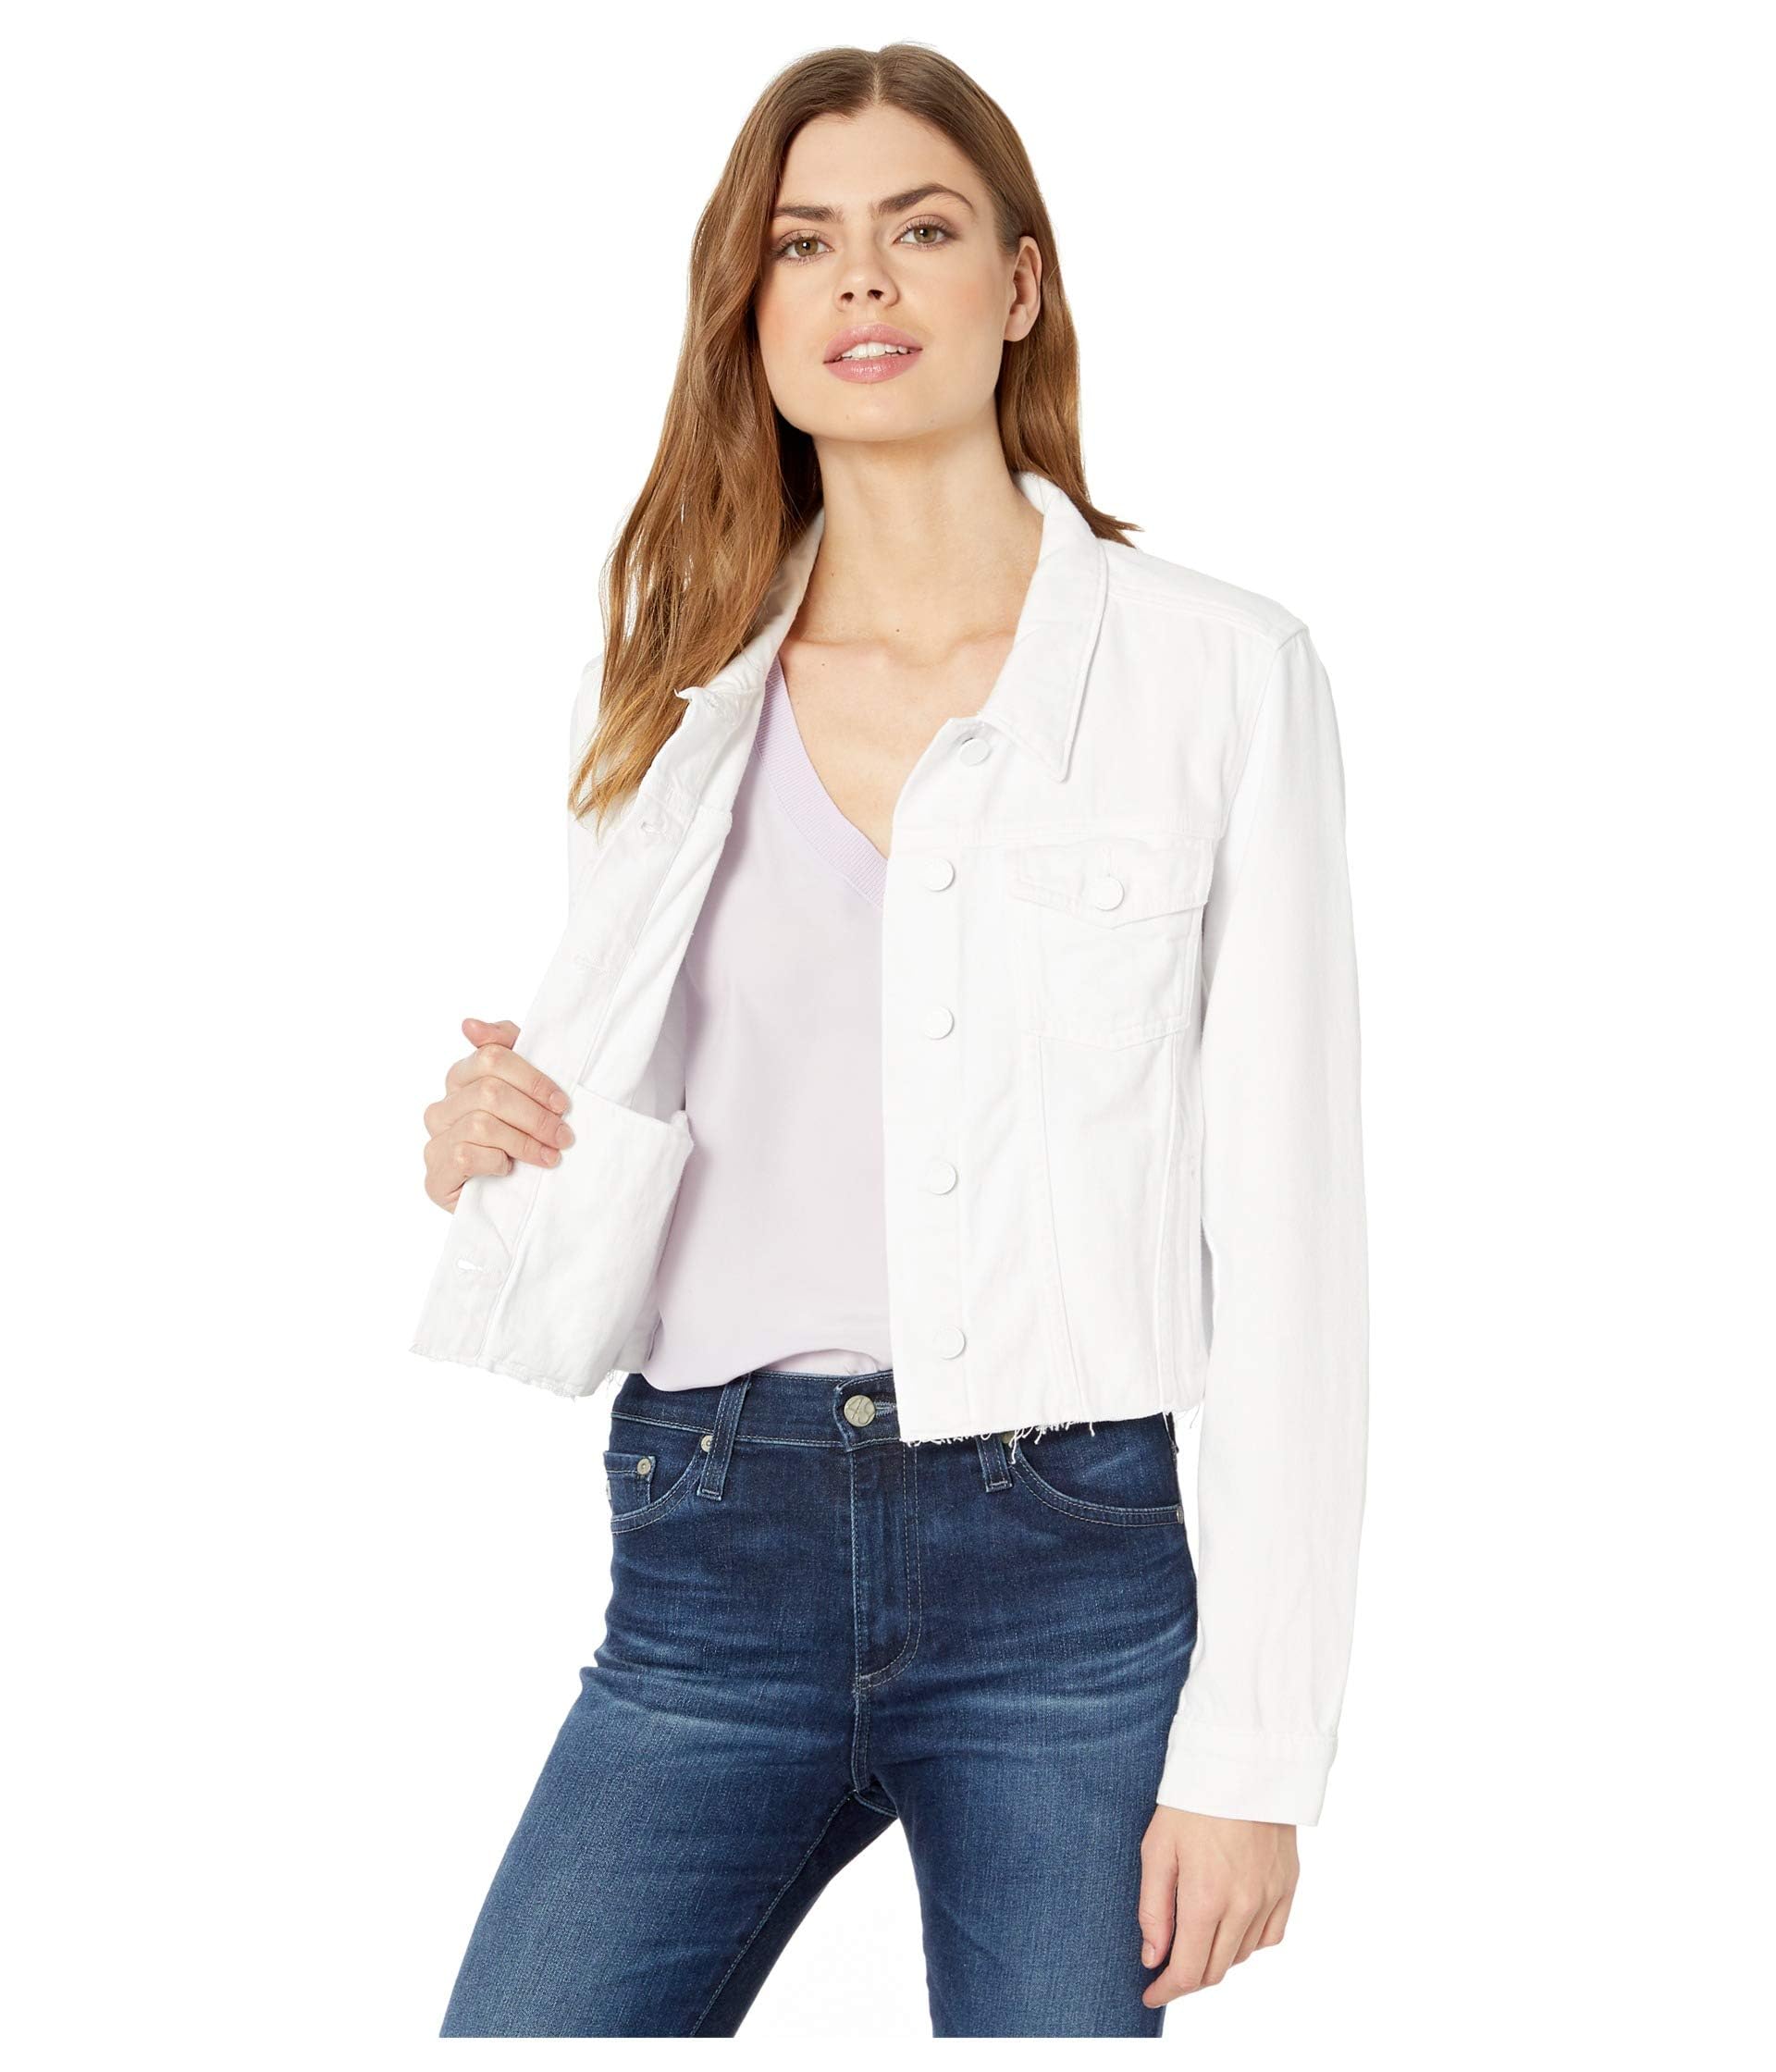 PAIGE Women's Relaxed Vivienne Jacket